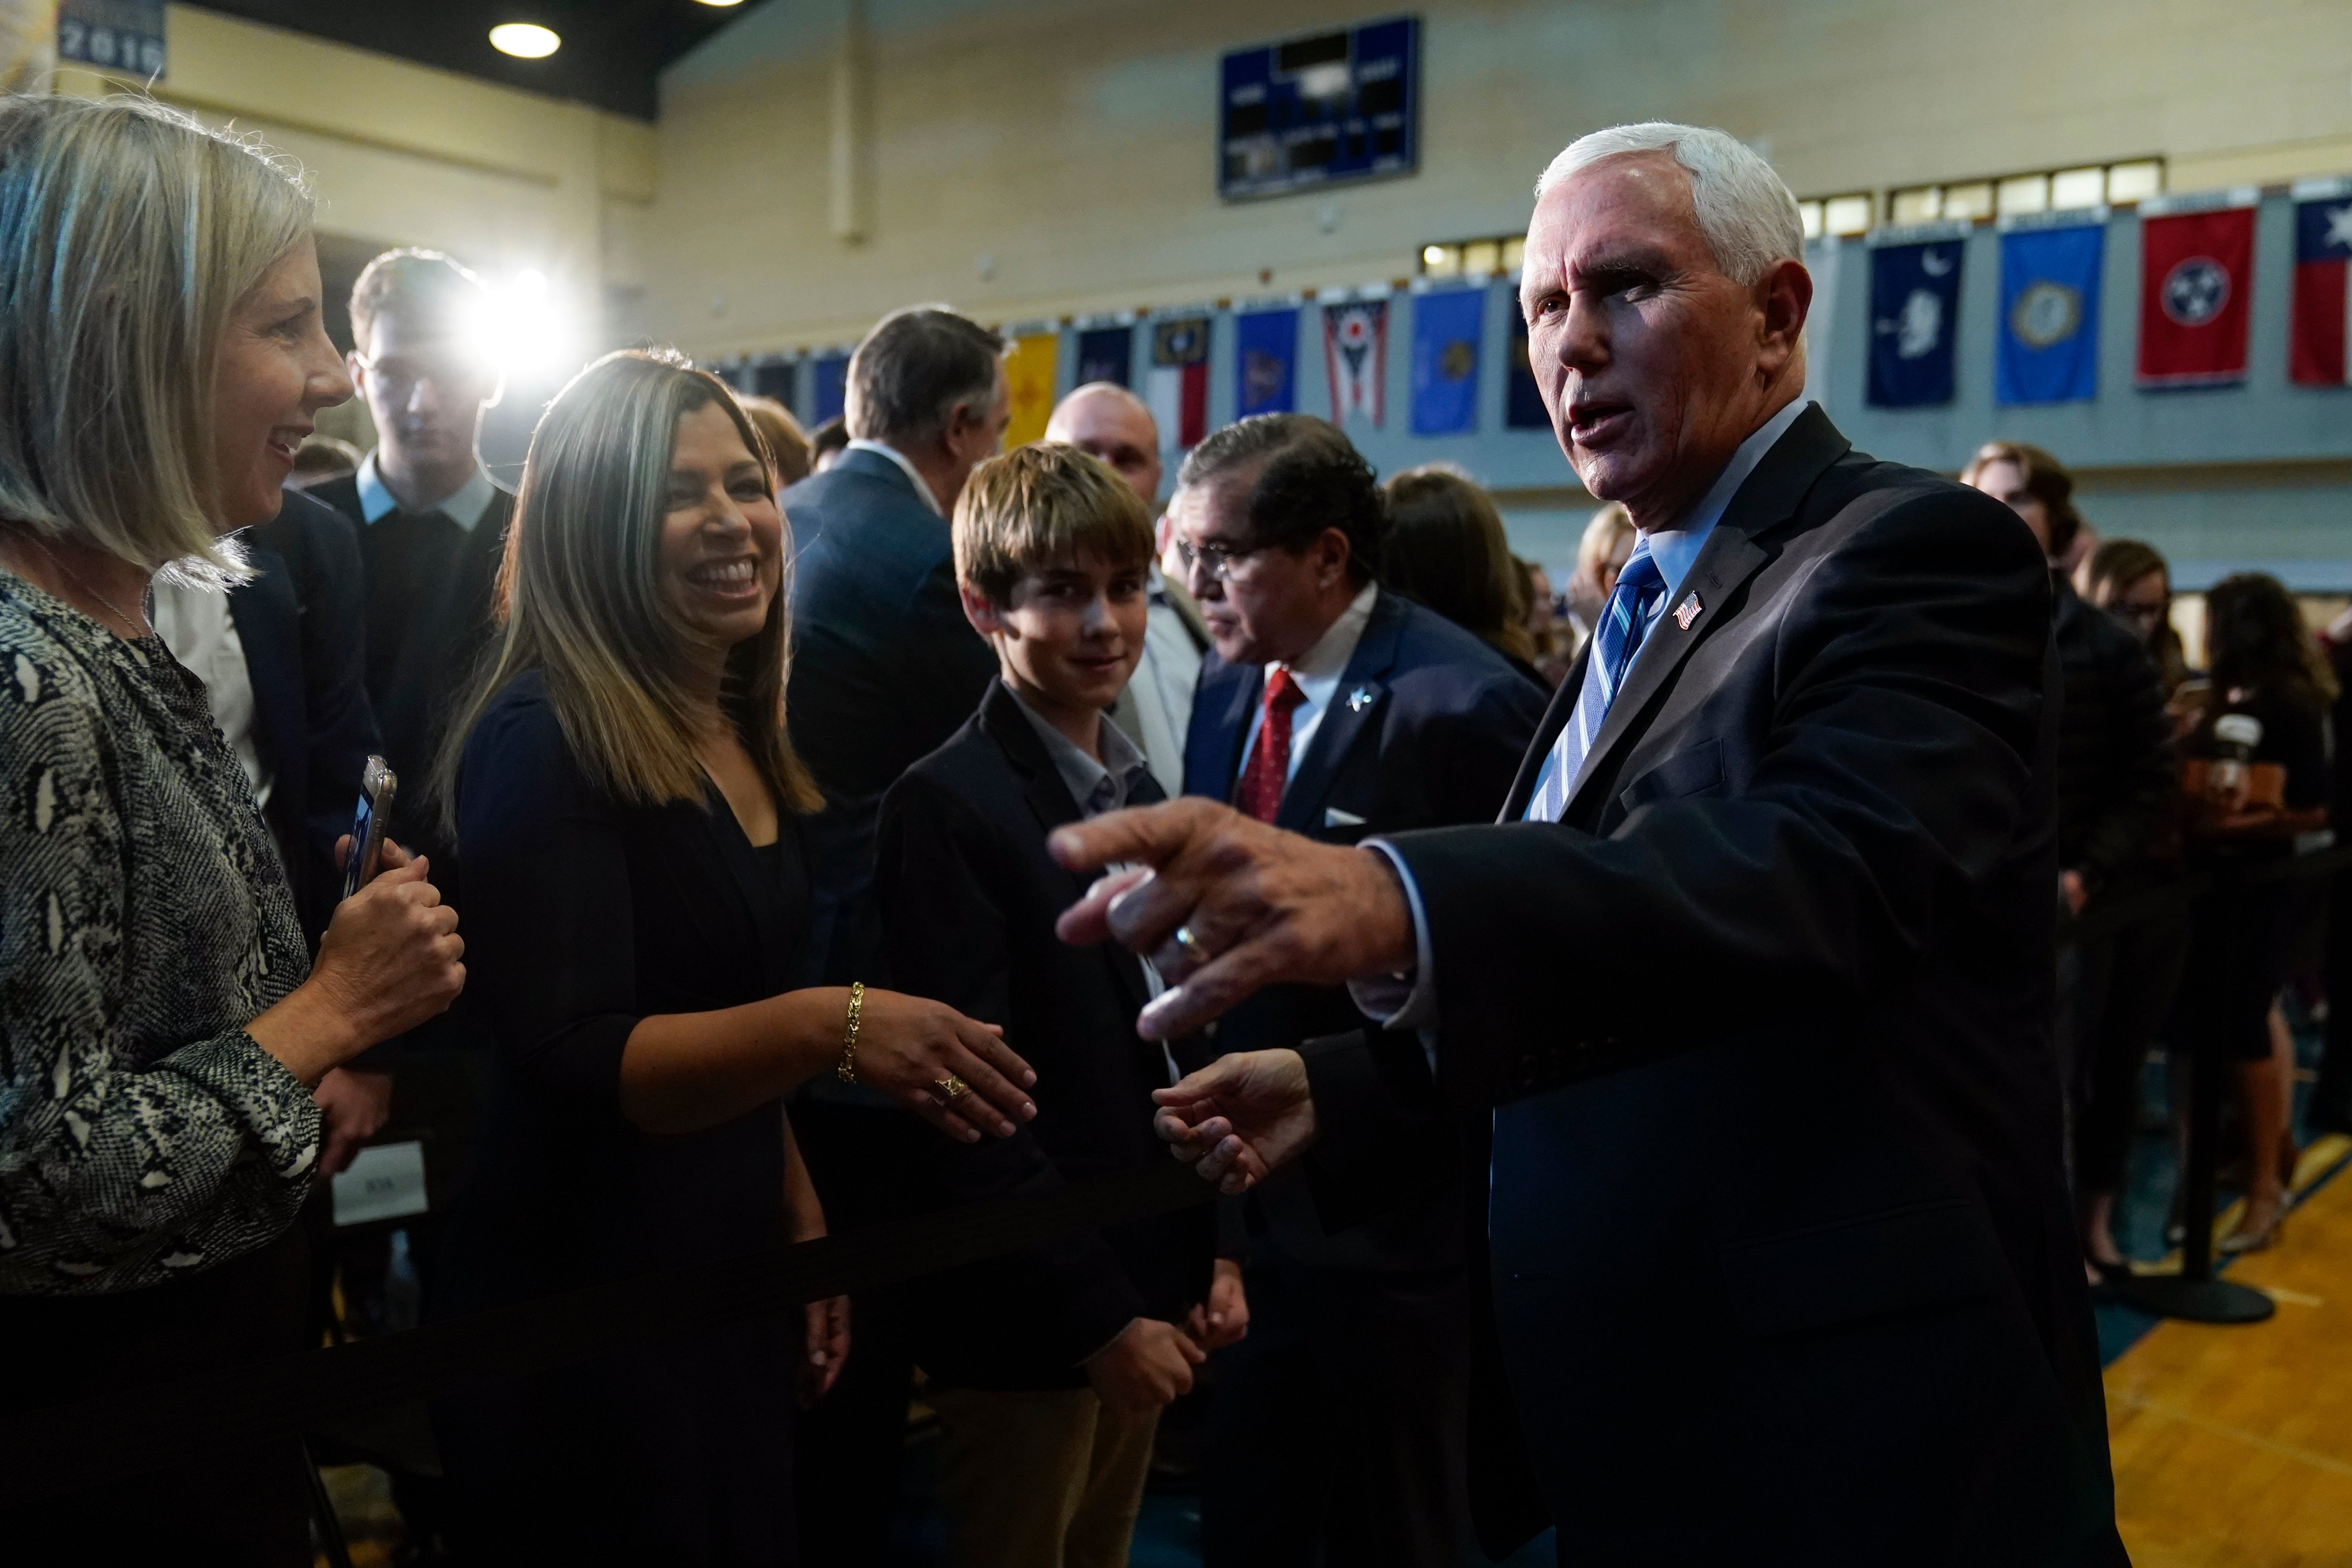 Former Vice President Mike Pence greets attendees after speaking about educational freedom at Patrick Henry College in Purcellville, Va., Thursday, Oct. 28, 2021